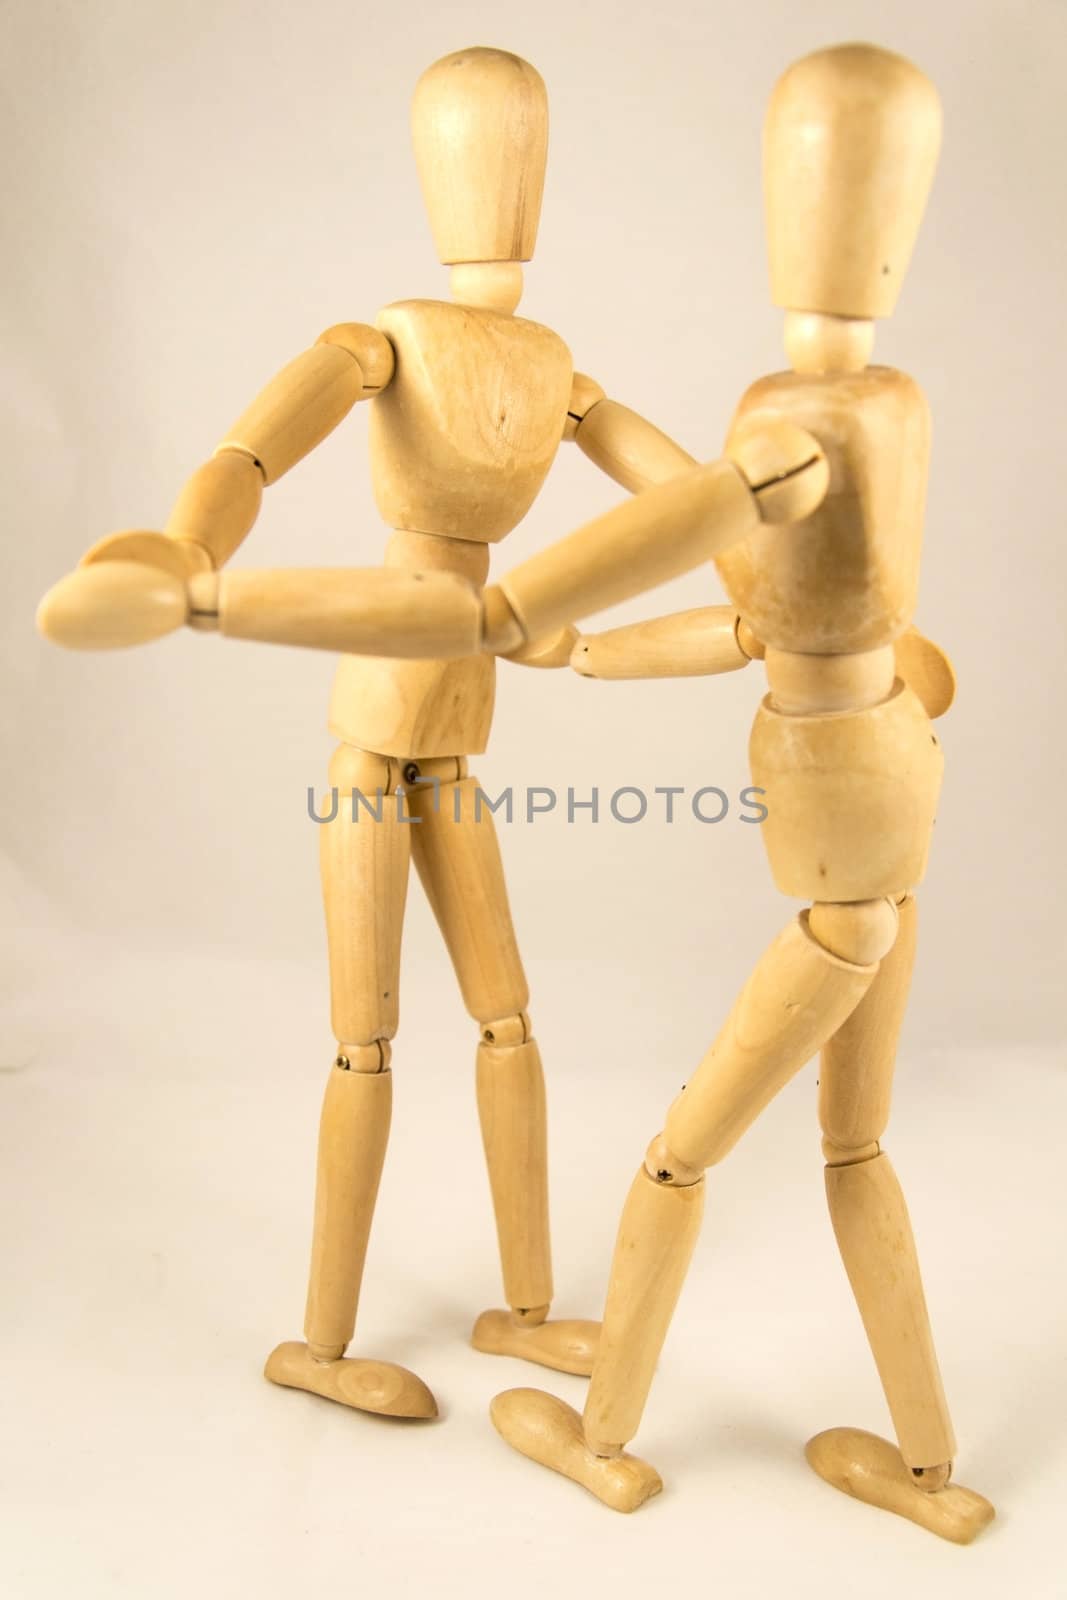 dummies dancing. sport and art for couple health